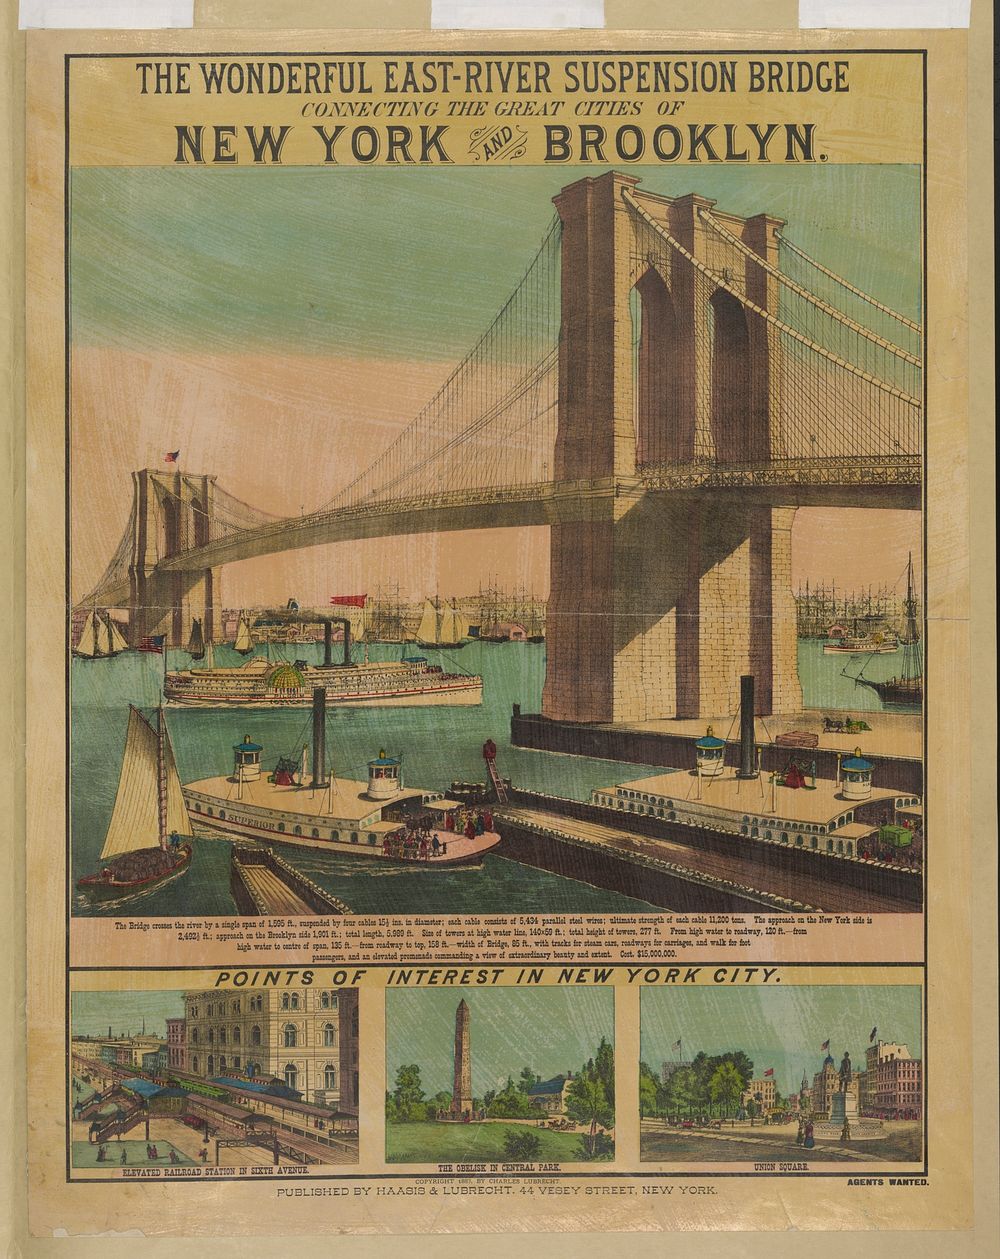 The wonderful East-River suspension bridge connecting the great cities of New York and Brooklyn